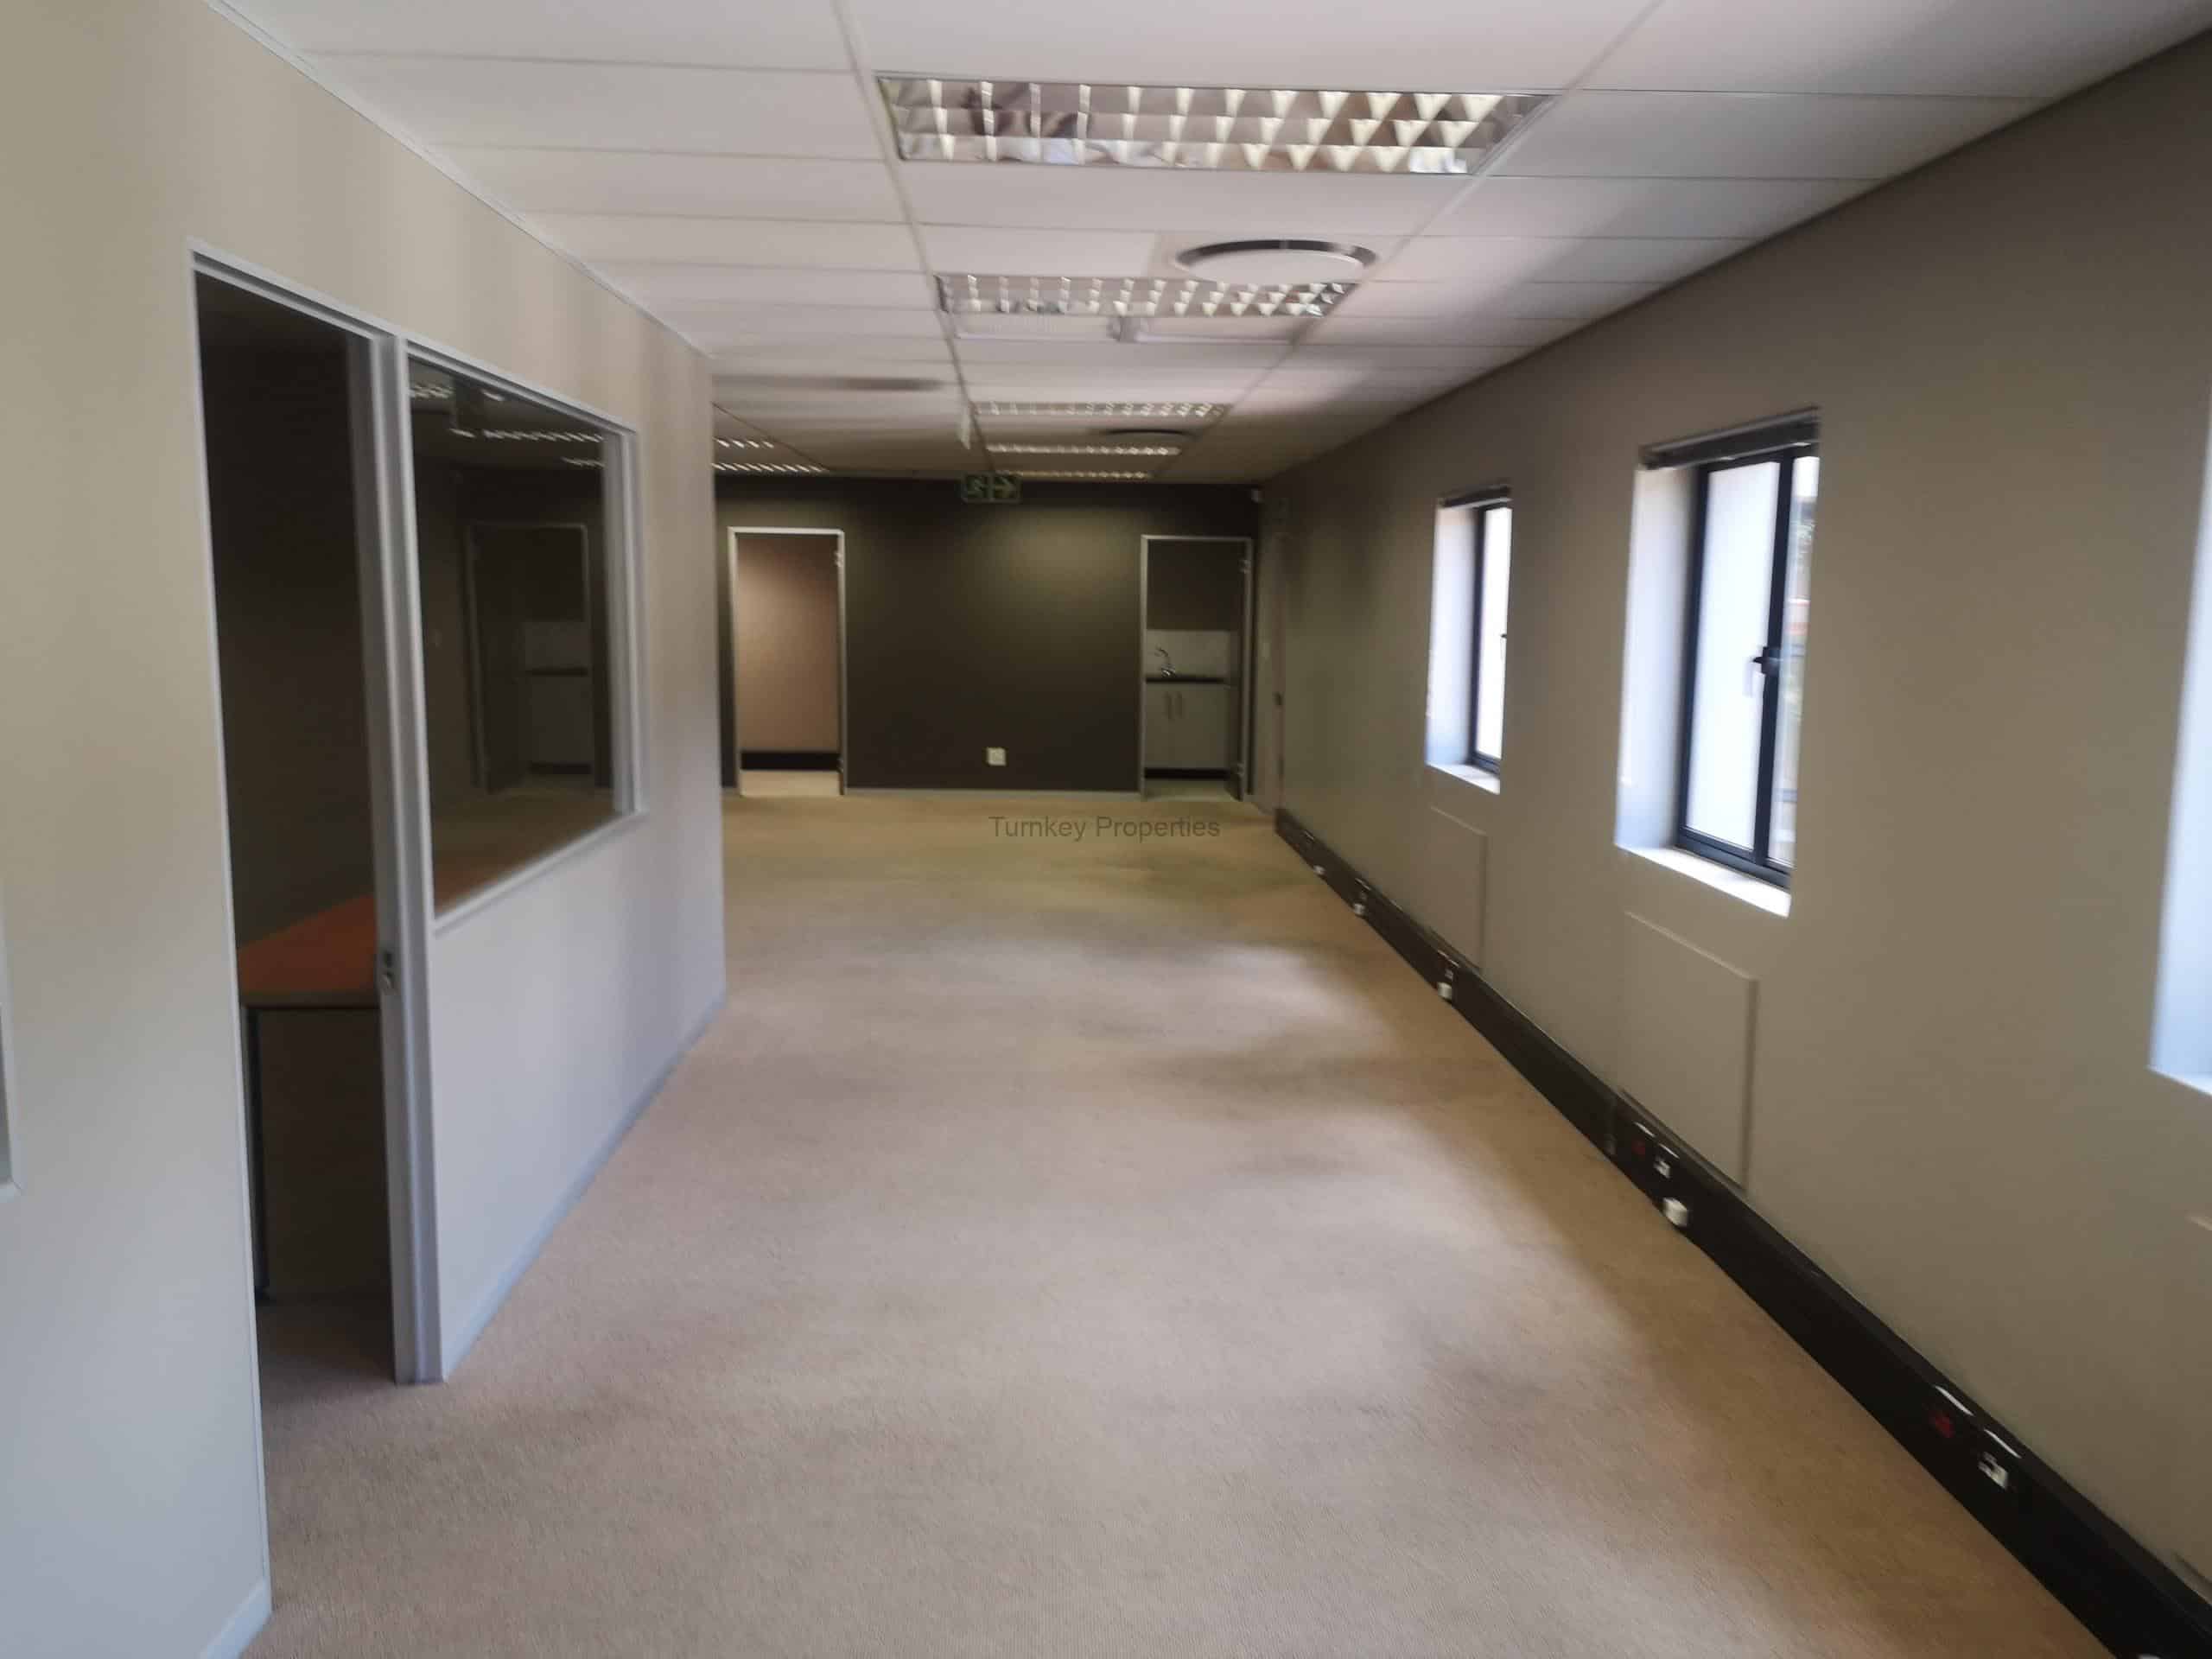 175m² office to let Clearwater office park, Strubensvallei